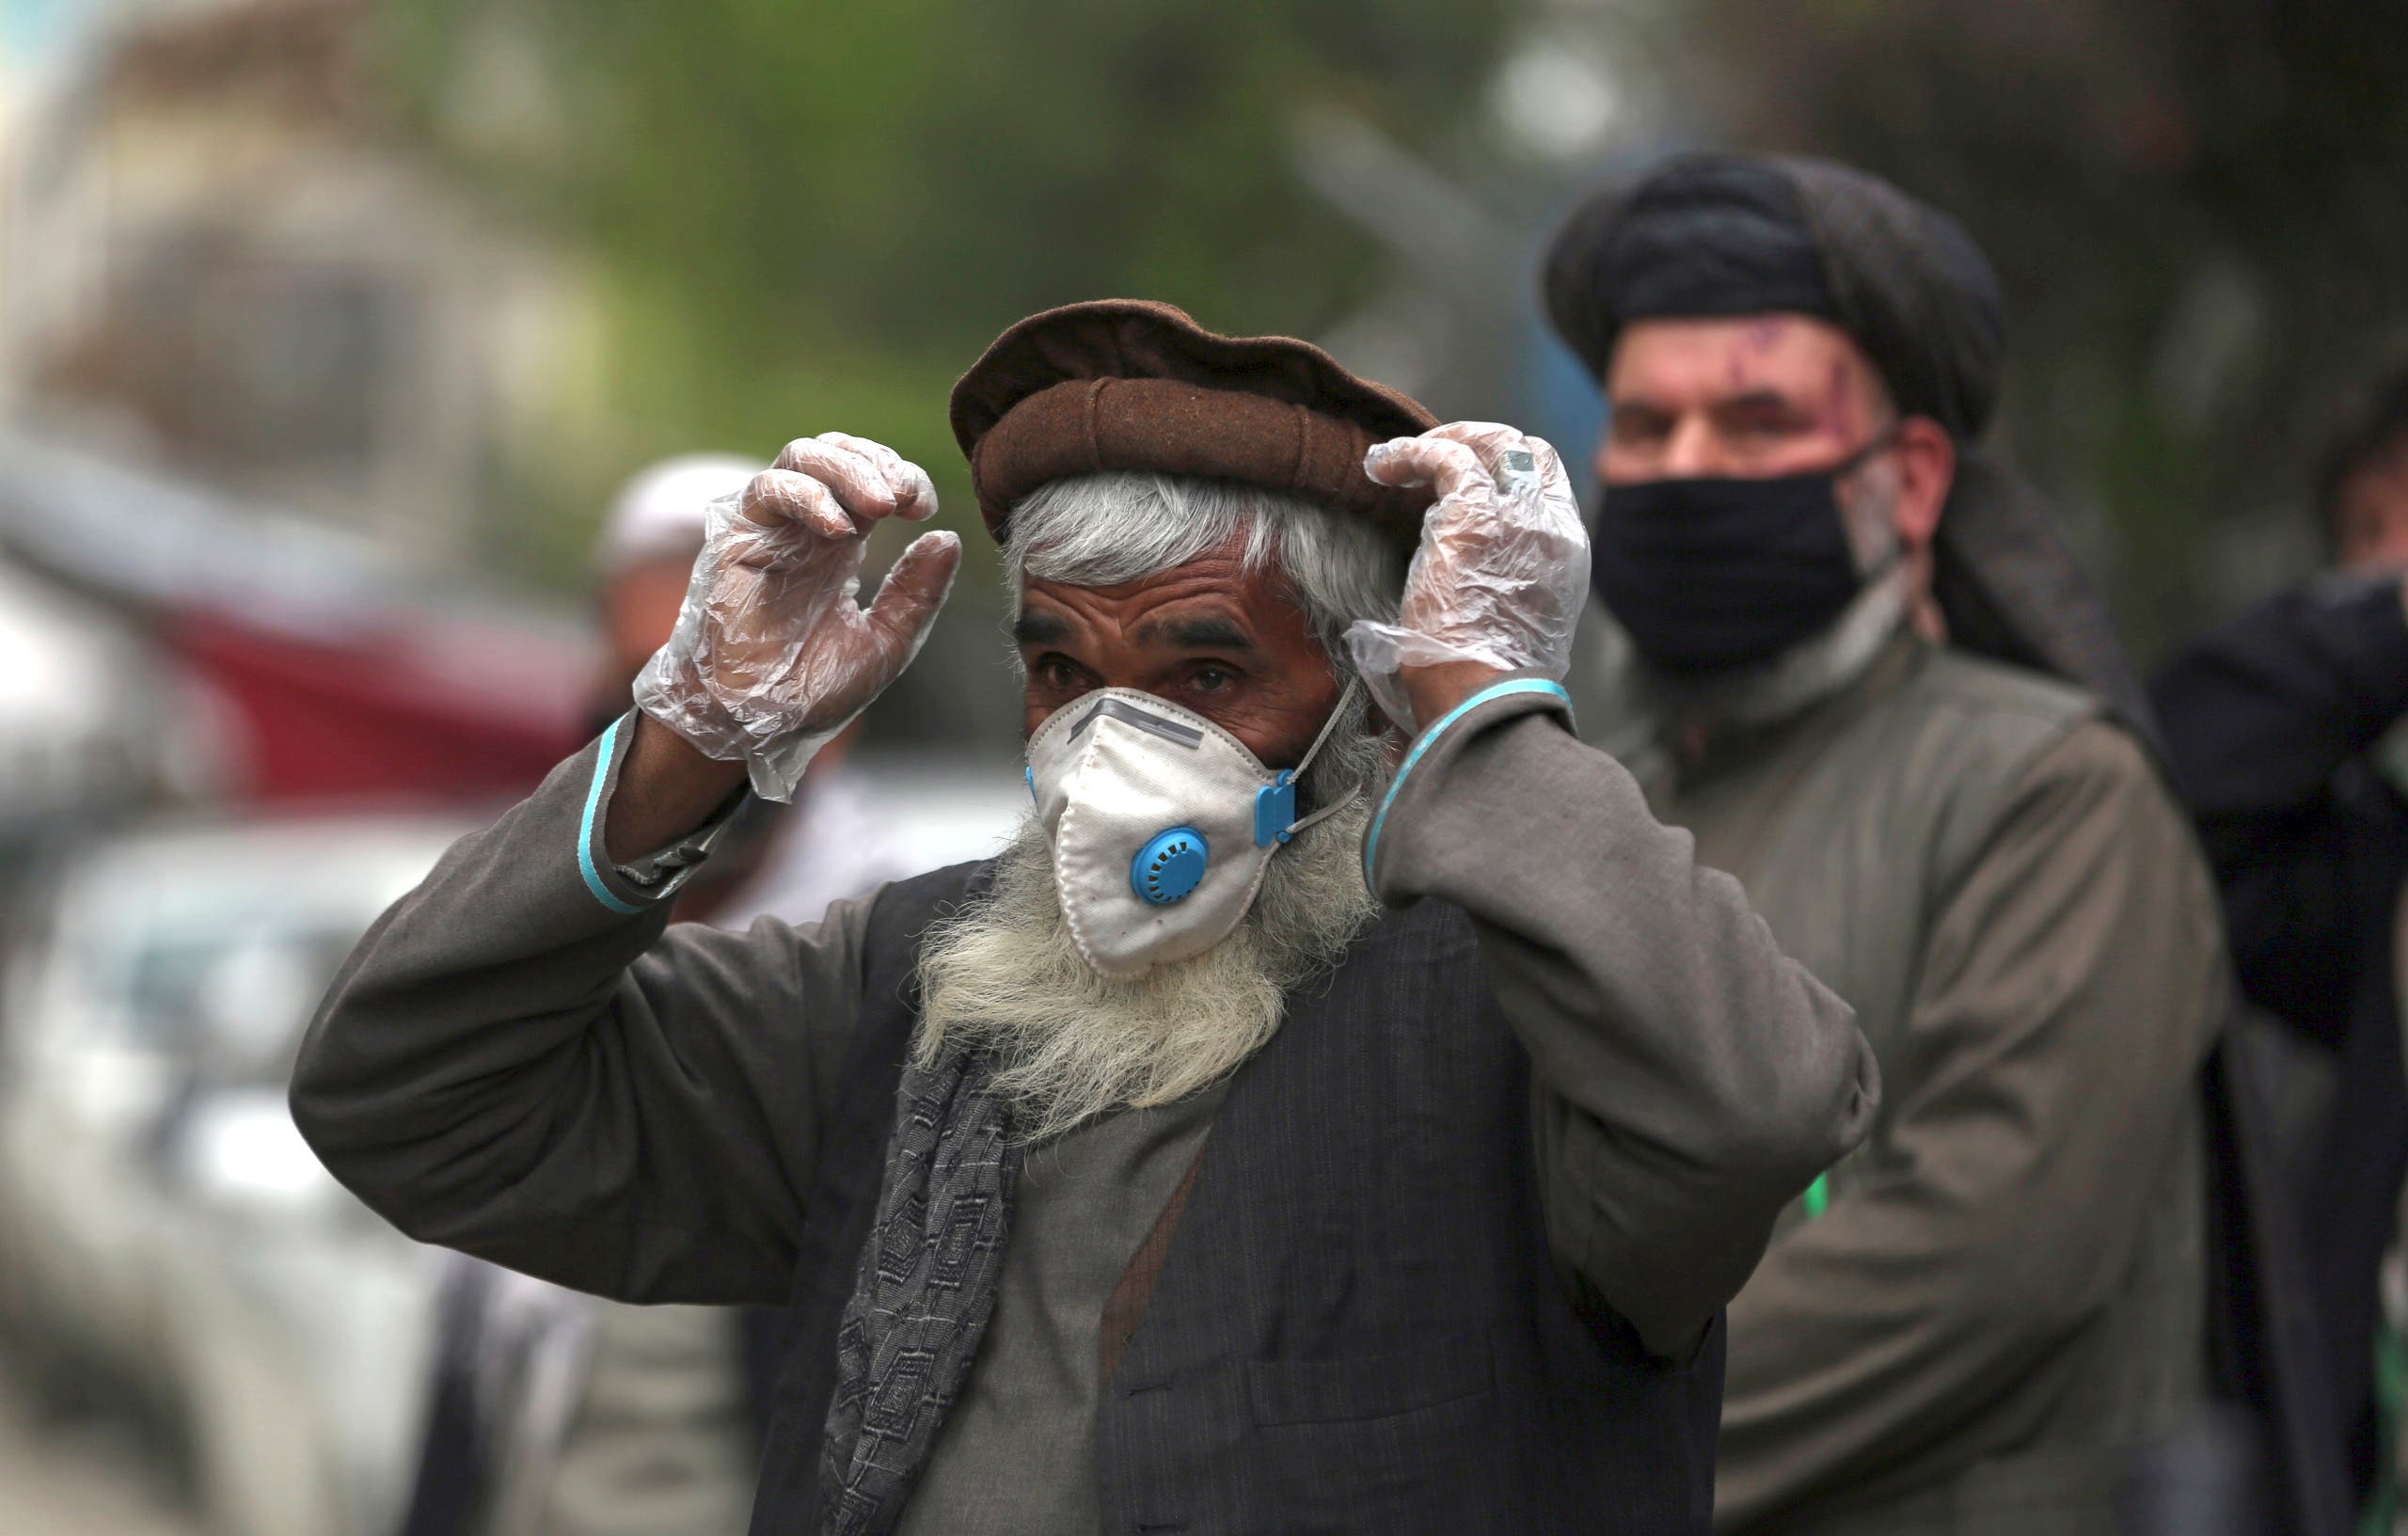 Daily-wage workers wear a protective face mask to help curb the spread of the coronavirus in Kabul, Afghanistan, April 20, 2020. (AP)